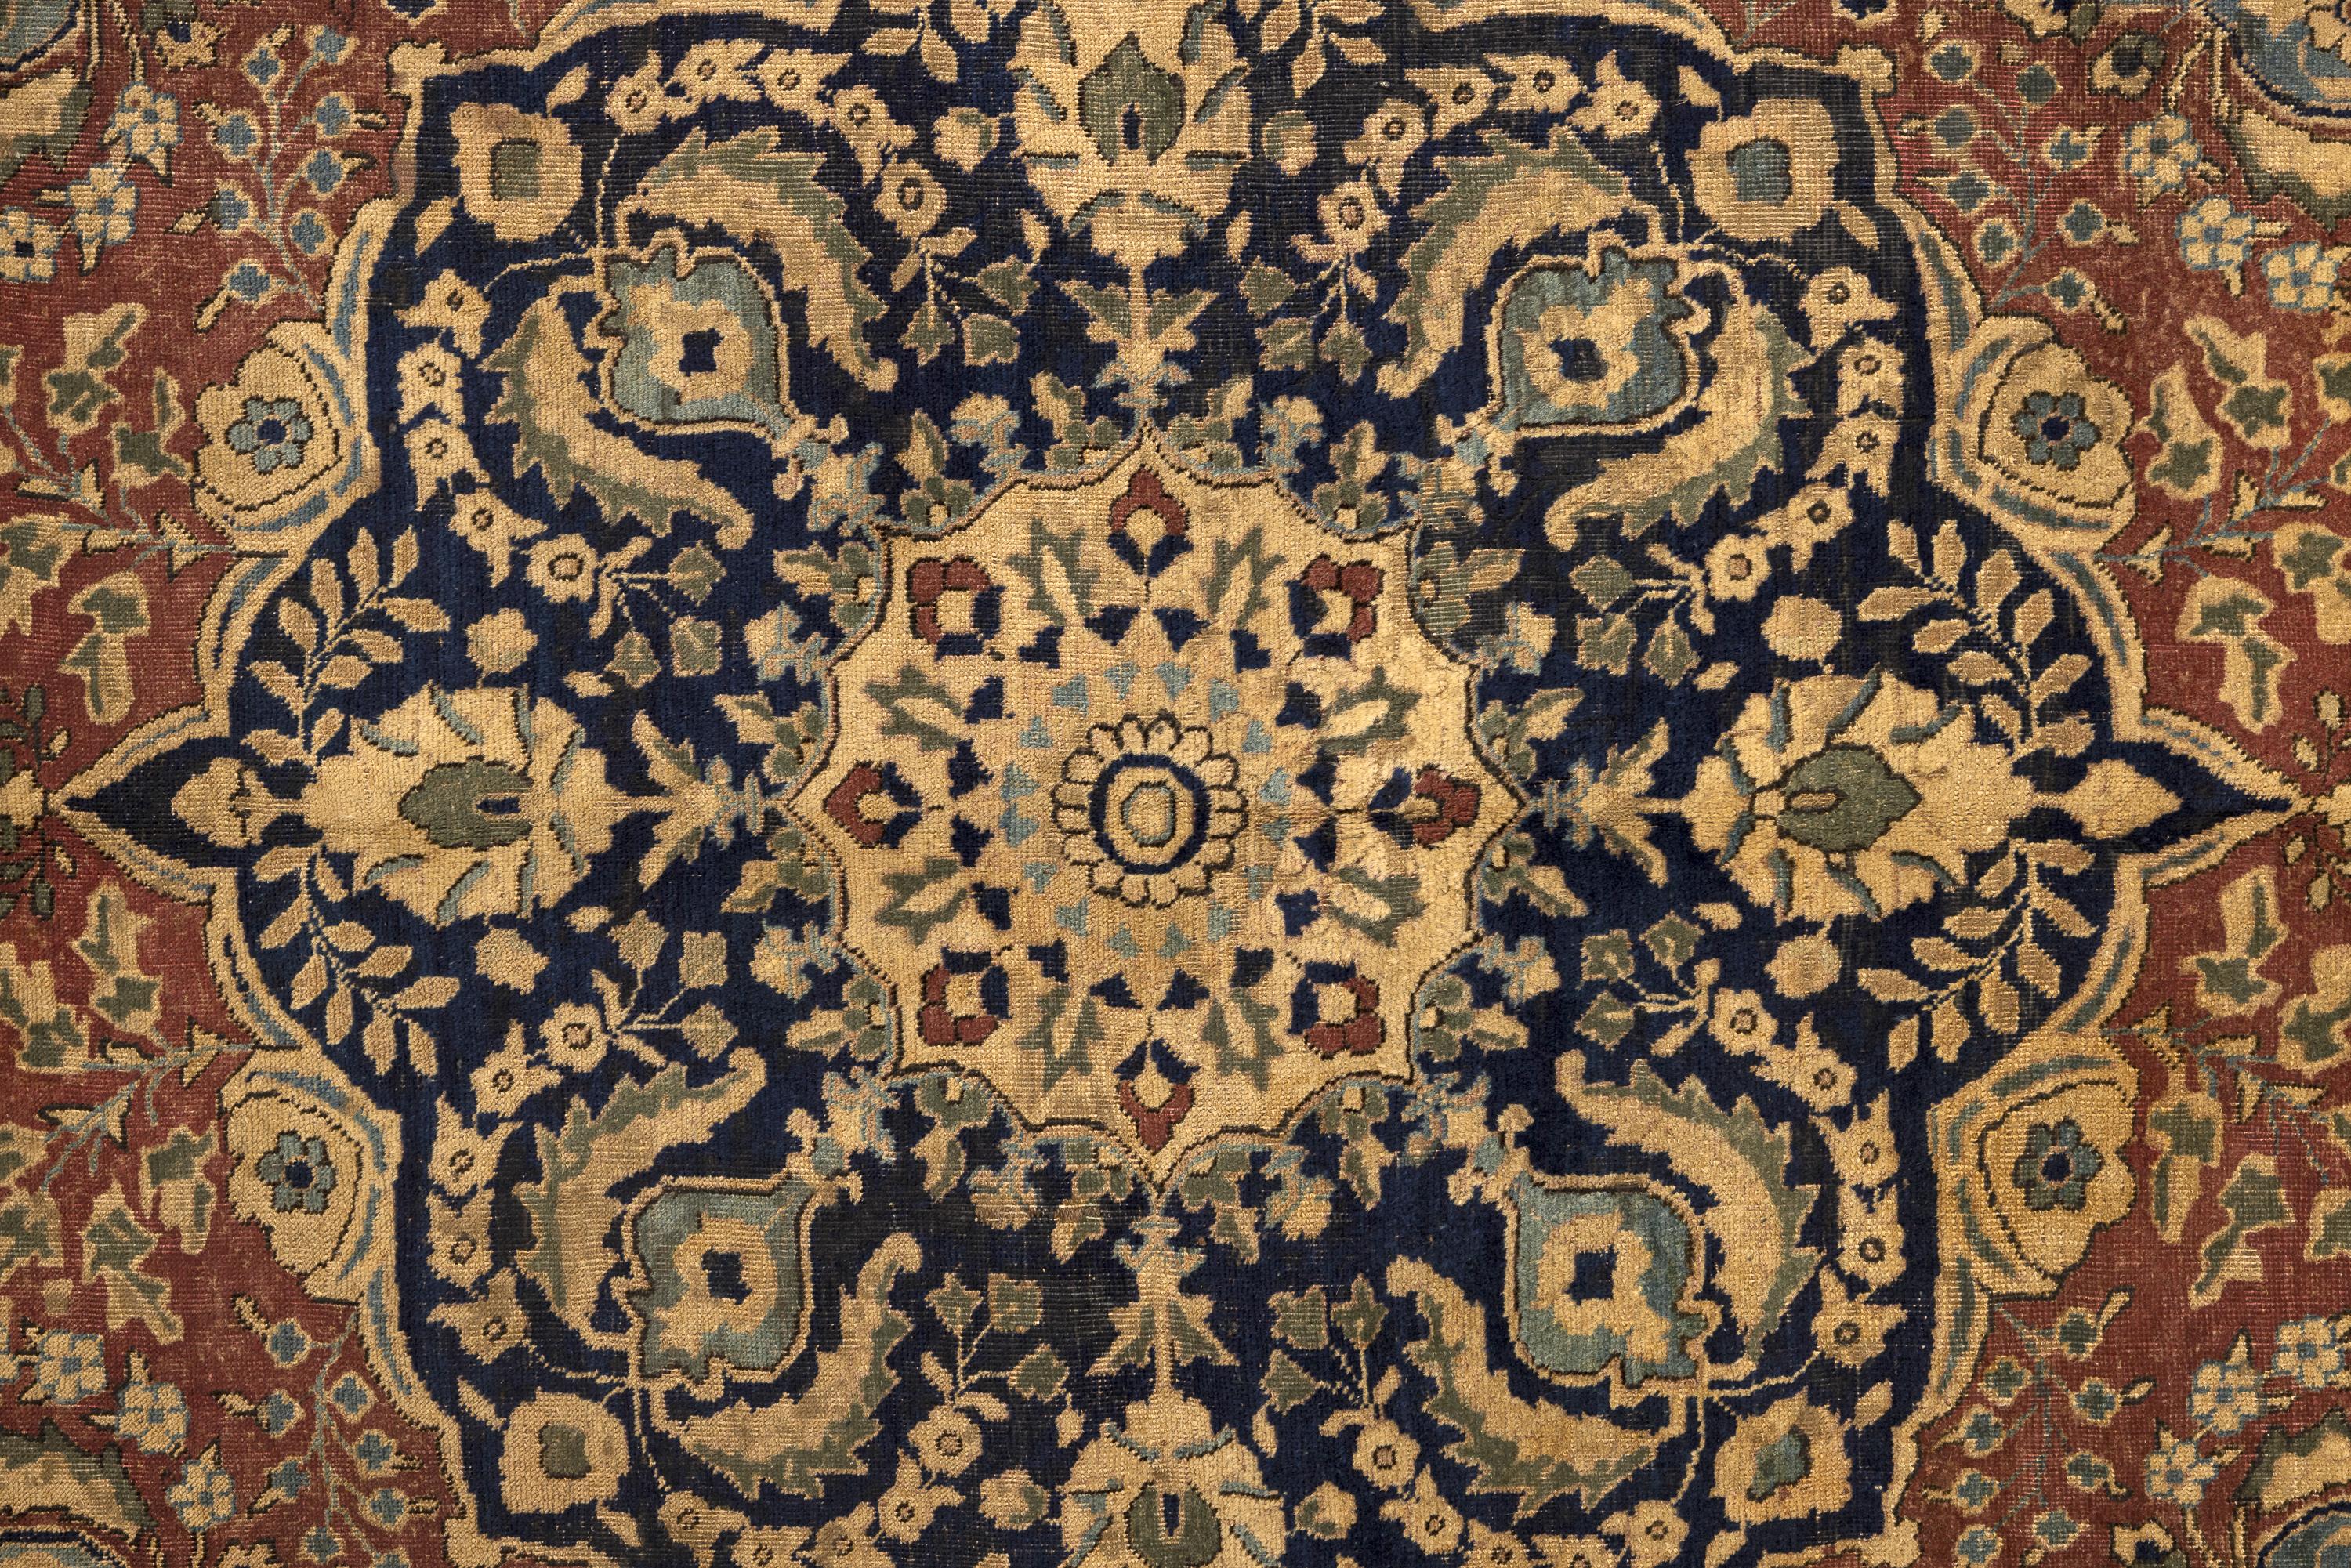 Tabriz – Northwest Persia

This stunning Tabriz presents a spectacular profusion of colours that cannot be matched by rugs made today. The artist skillfully wove this rug rich in solid colours with perfect harmony. Looking at this antique Tabriz is